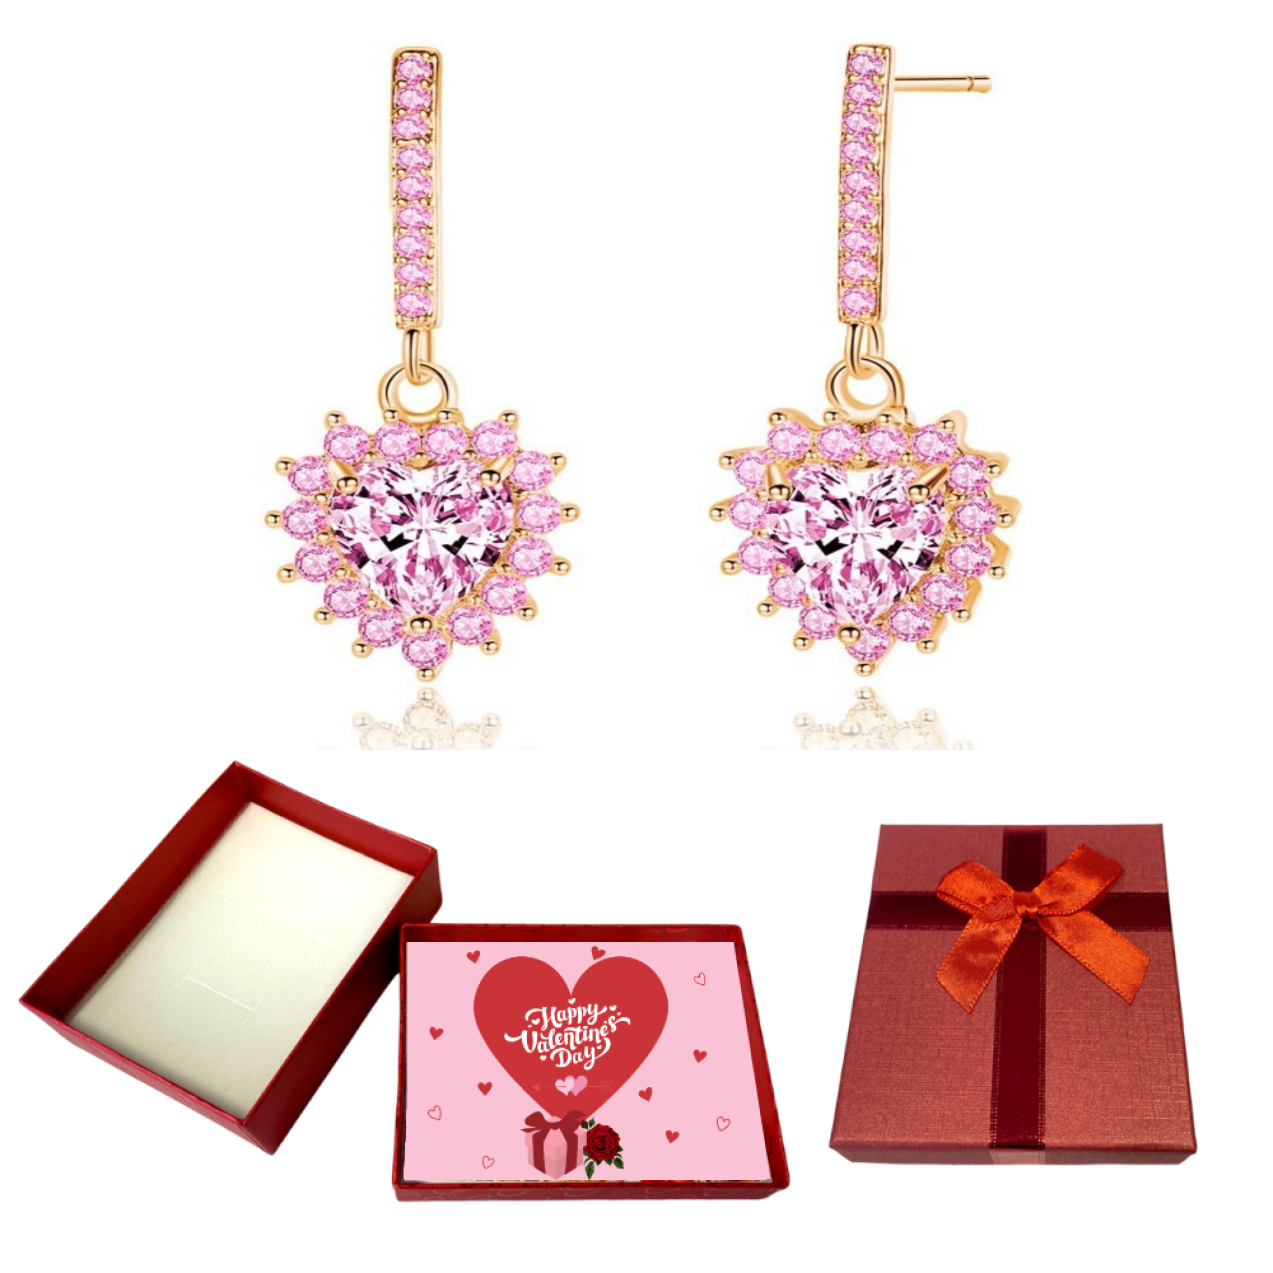 10 pcs - Heart Drop Earrings with Pink Cubic Zirconia Crystals With Valentine Gift Box|GCJ136-Valentine Box|UK SELLER